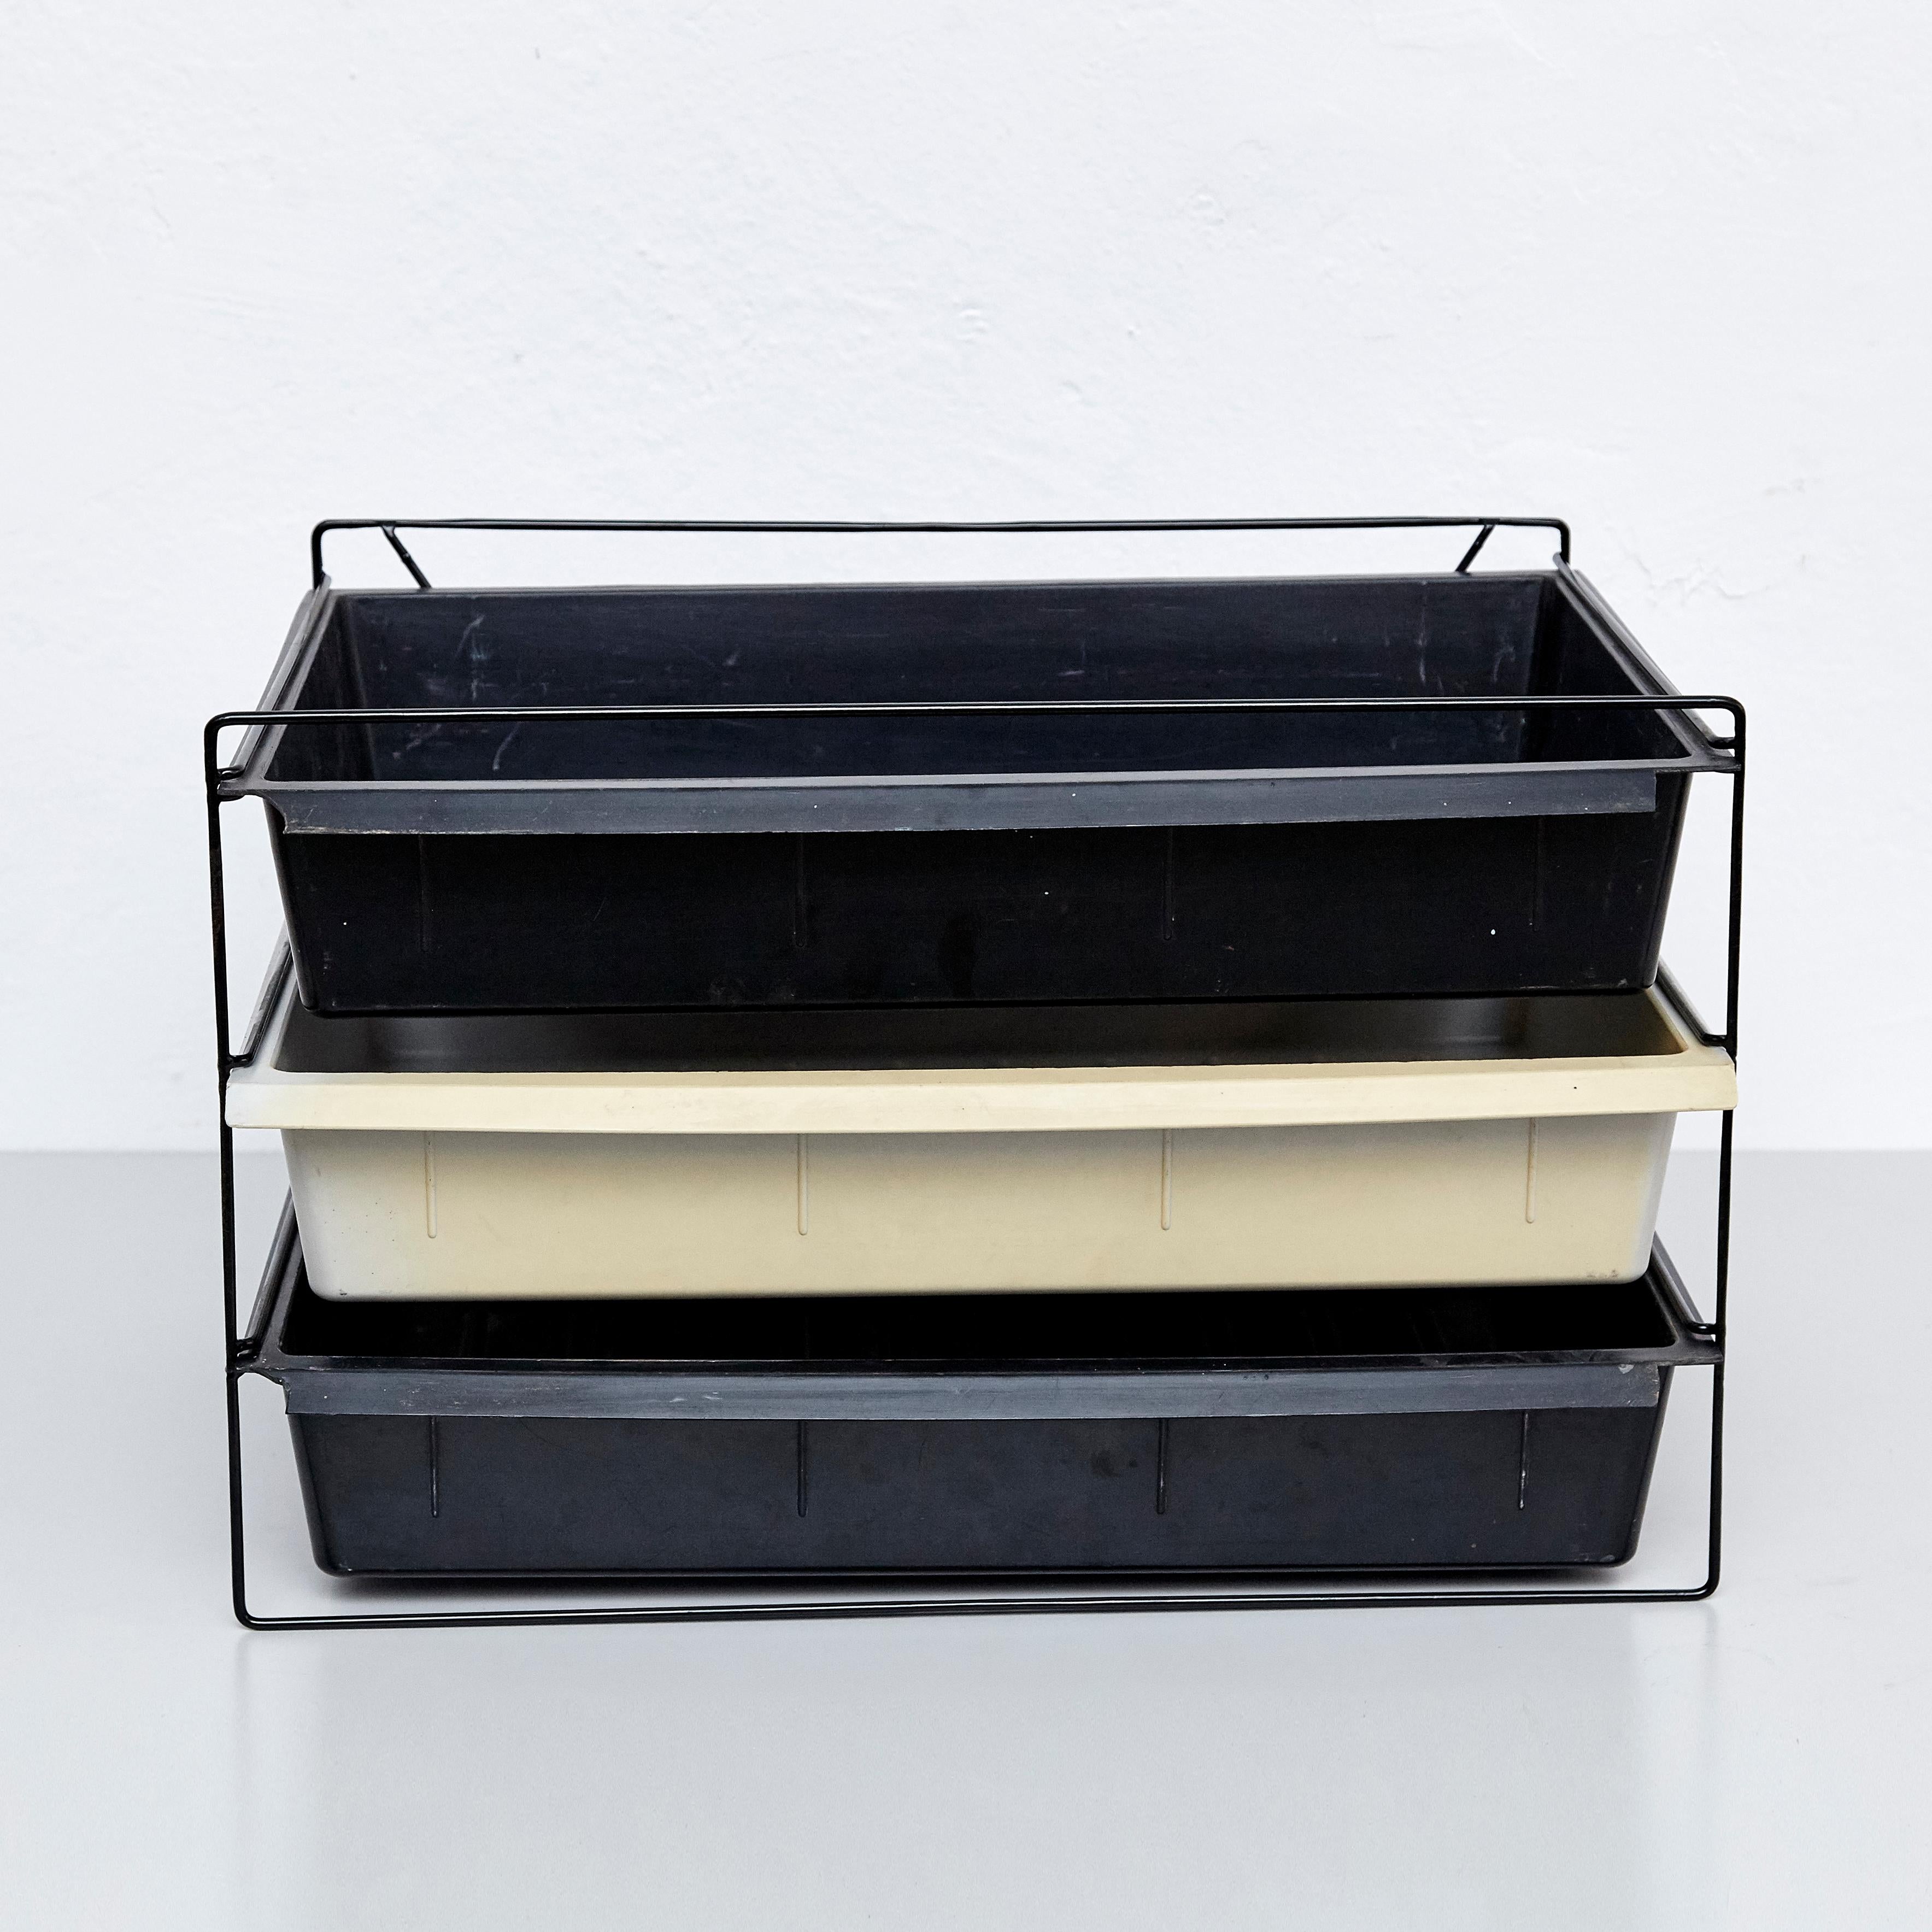 File rack designed by Charlotte Perriand, circa 1950.
Manufactured in France, circa 1950.
Moulded plastic and painted metal.

Each drawer moulded with Modele Charlotte Perriand or Brevete S.G.D.G.

In original condition, with minor wear